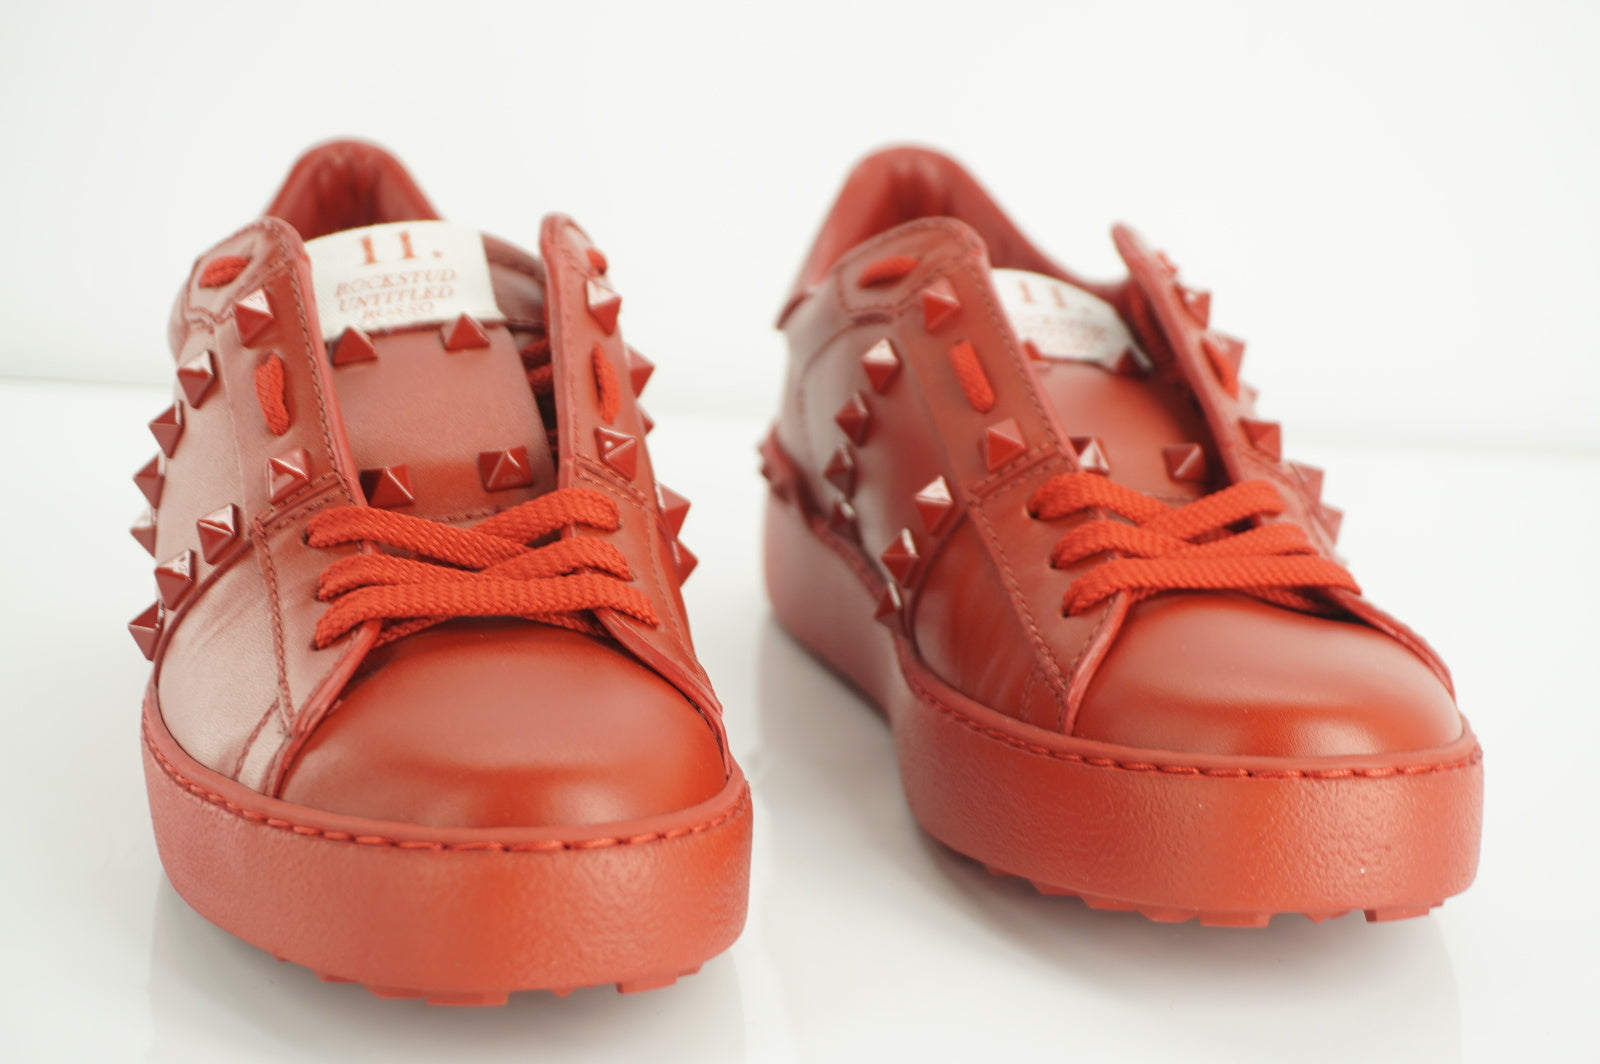 Valentino Rockstud Red Leather Sneaker Flats Size 36 low top lace up NIB $795